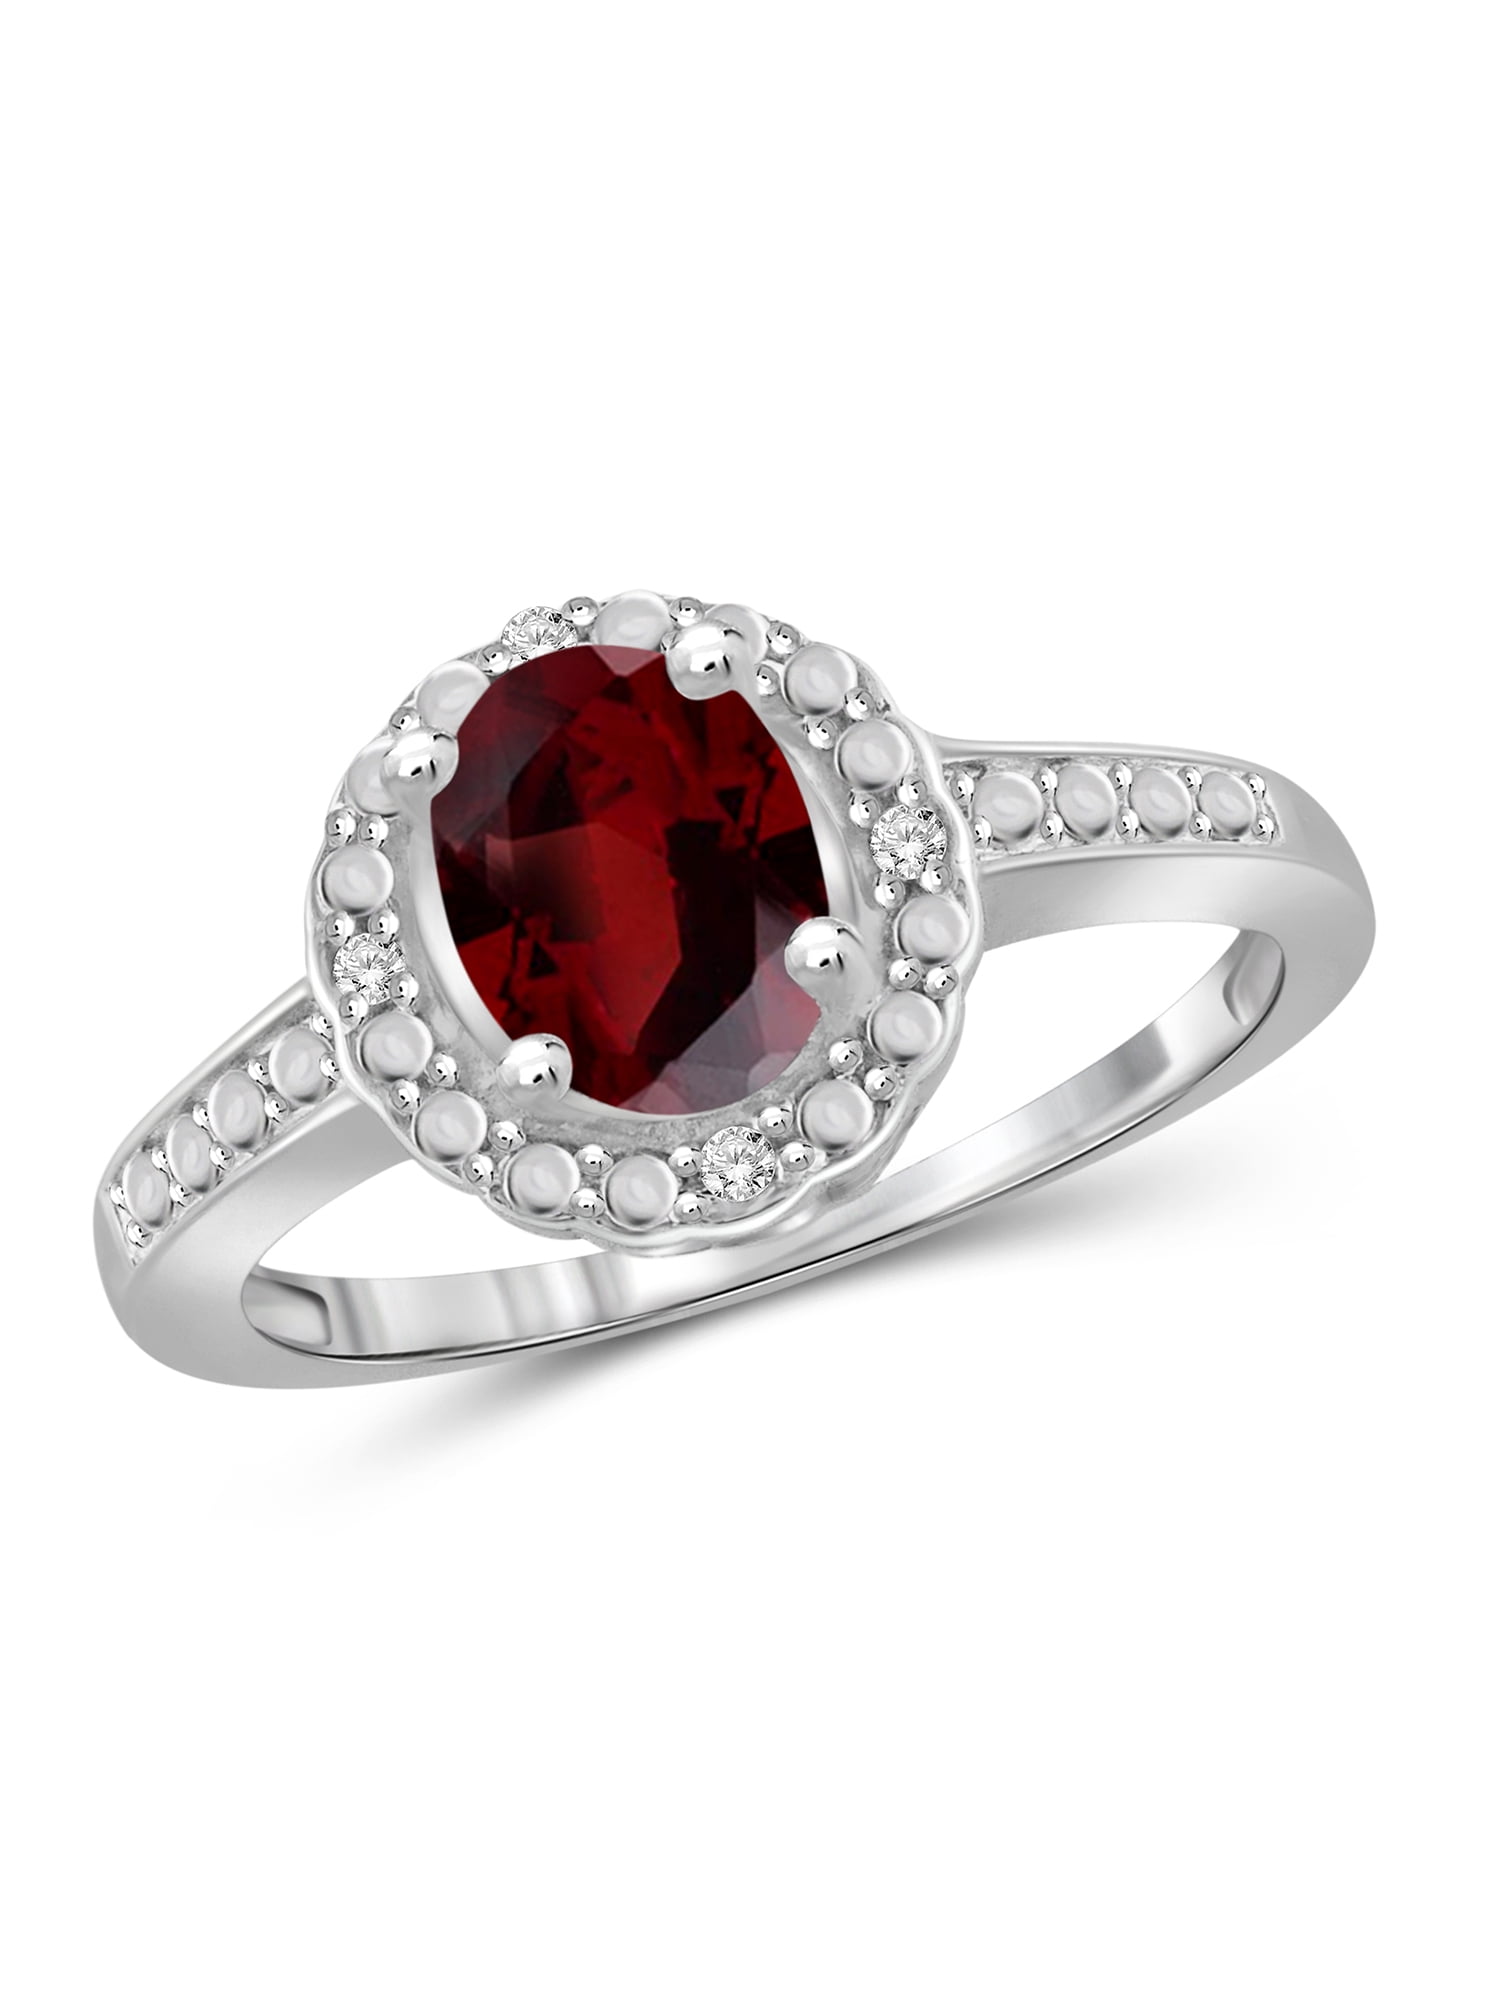 Pear Cut Garnet Dome Ring in 14K Gold Over Sterling Silver, 7